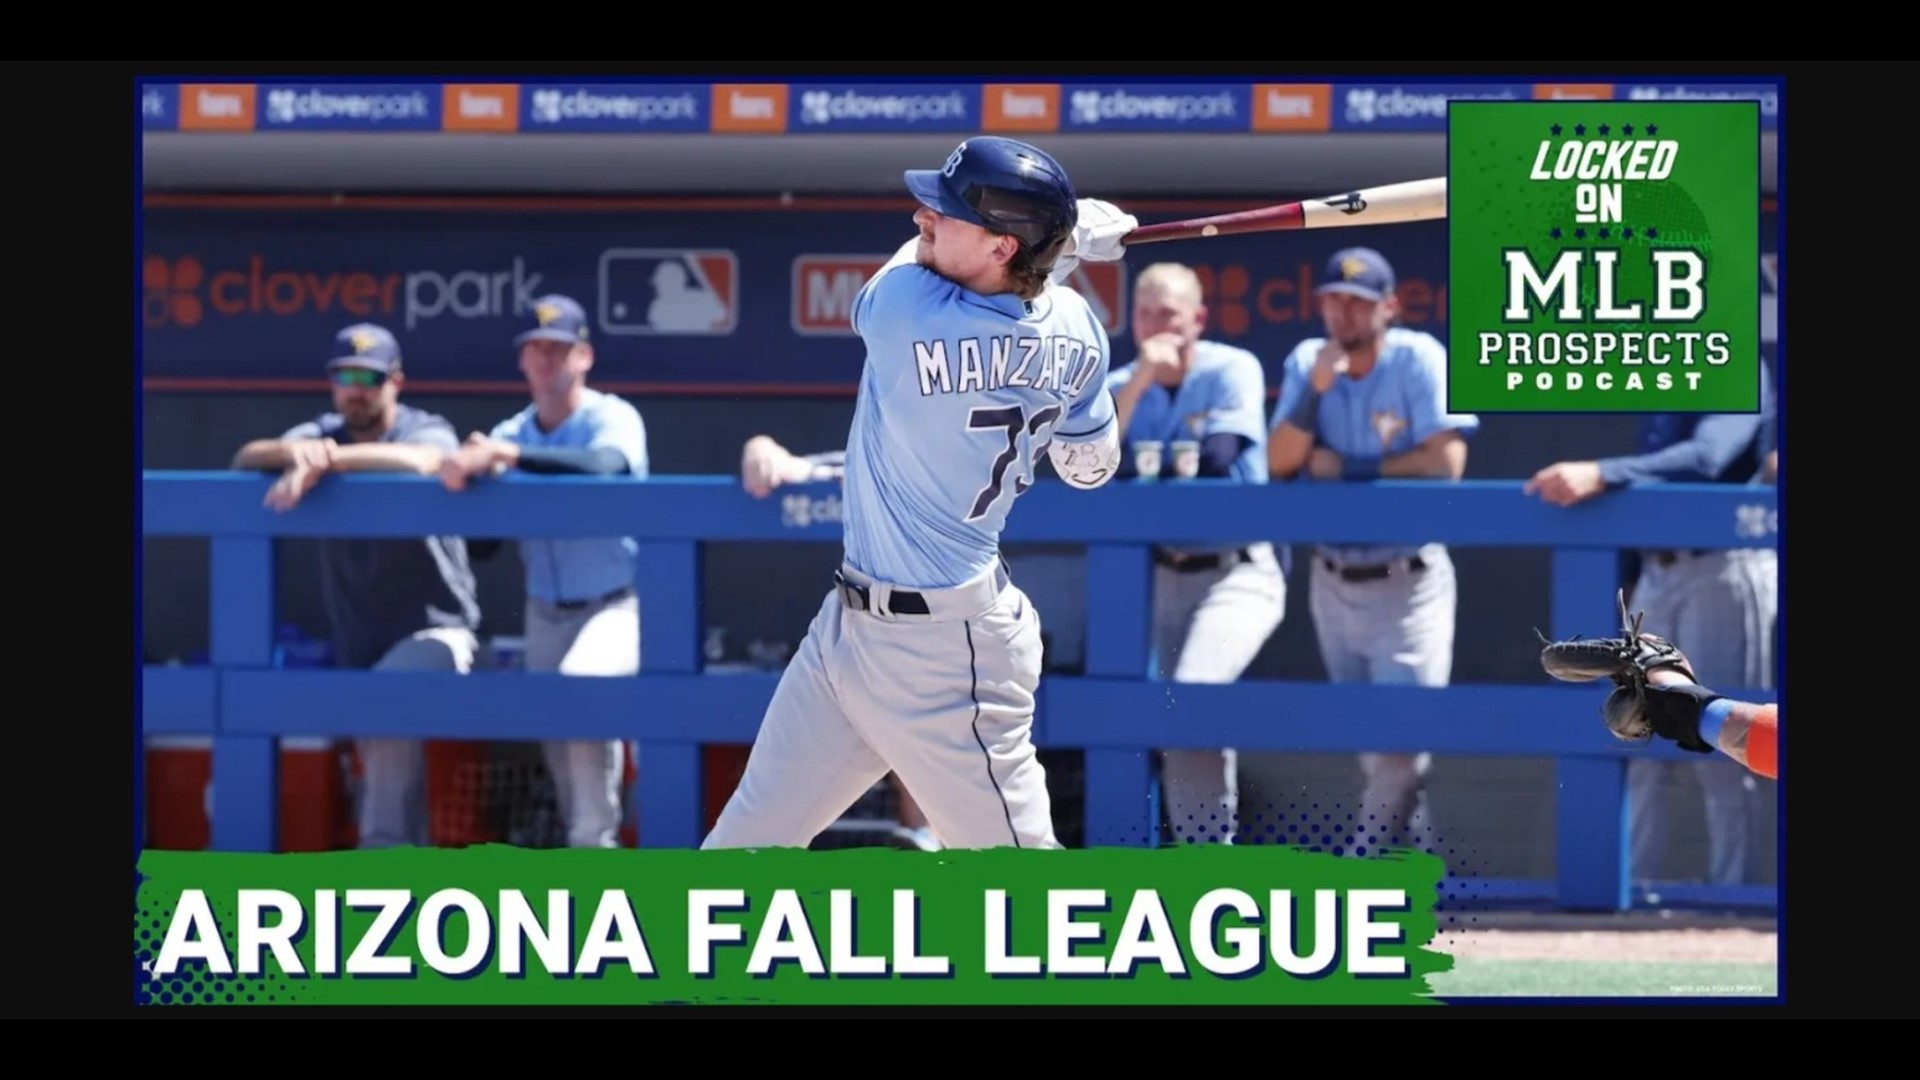 Join host Lindsay Crosby in this mailbag episode of Locked On MLB Prospects, where we unpack the intriguing rosters of the Arizona Fall League.